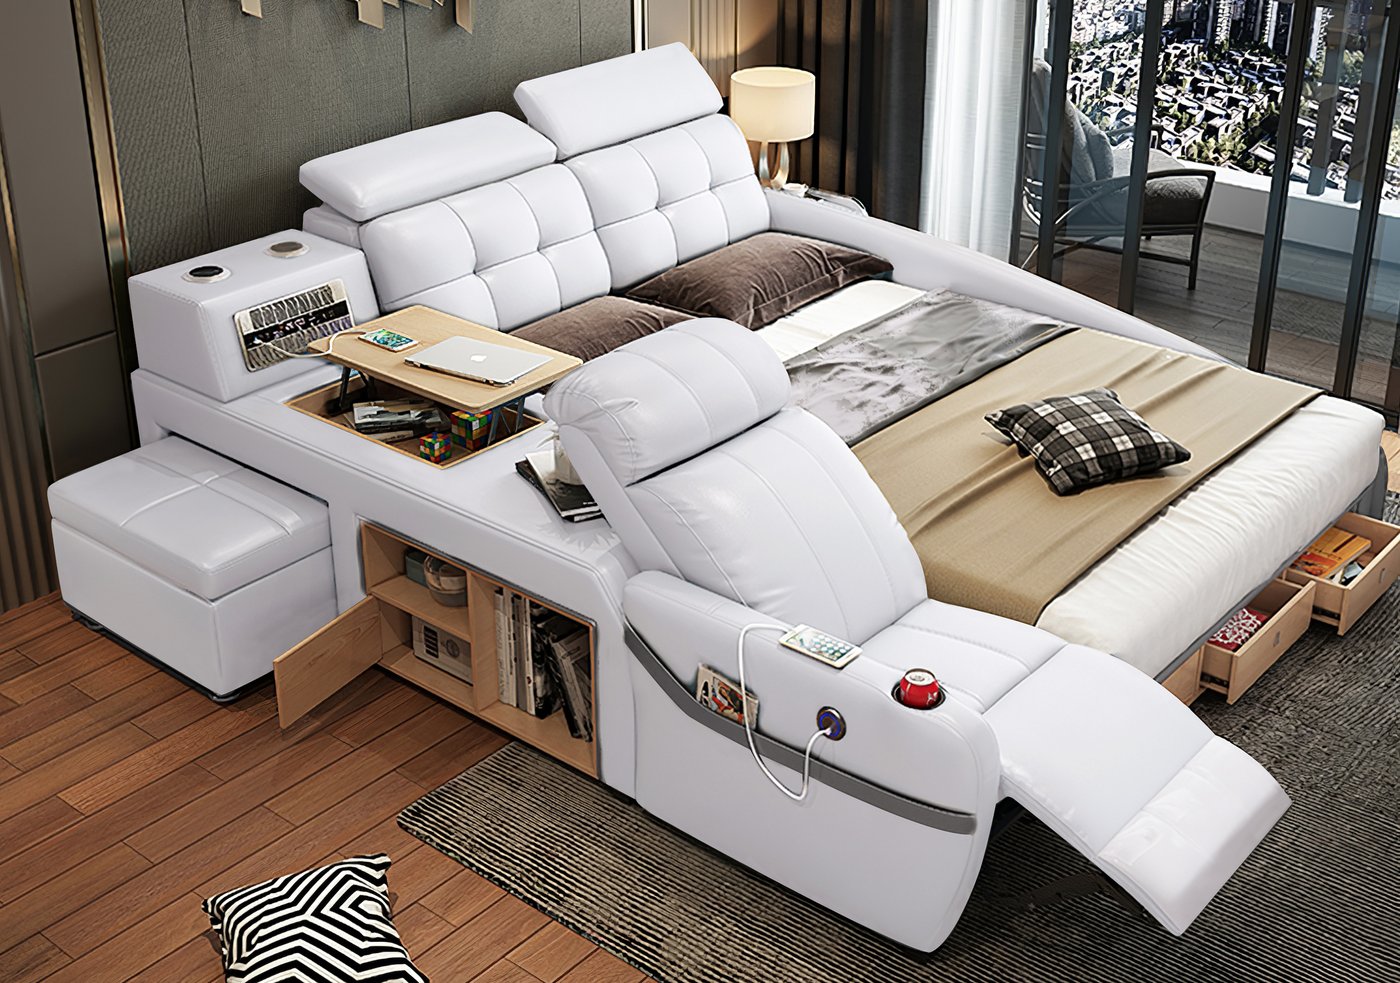 All-In-One Smart Bed Has An Integrated Recliner and Air Filtration System